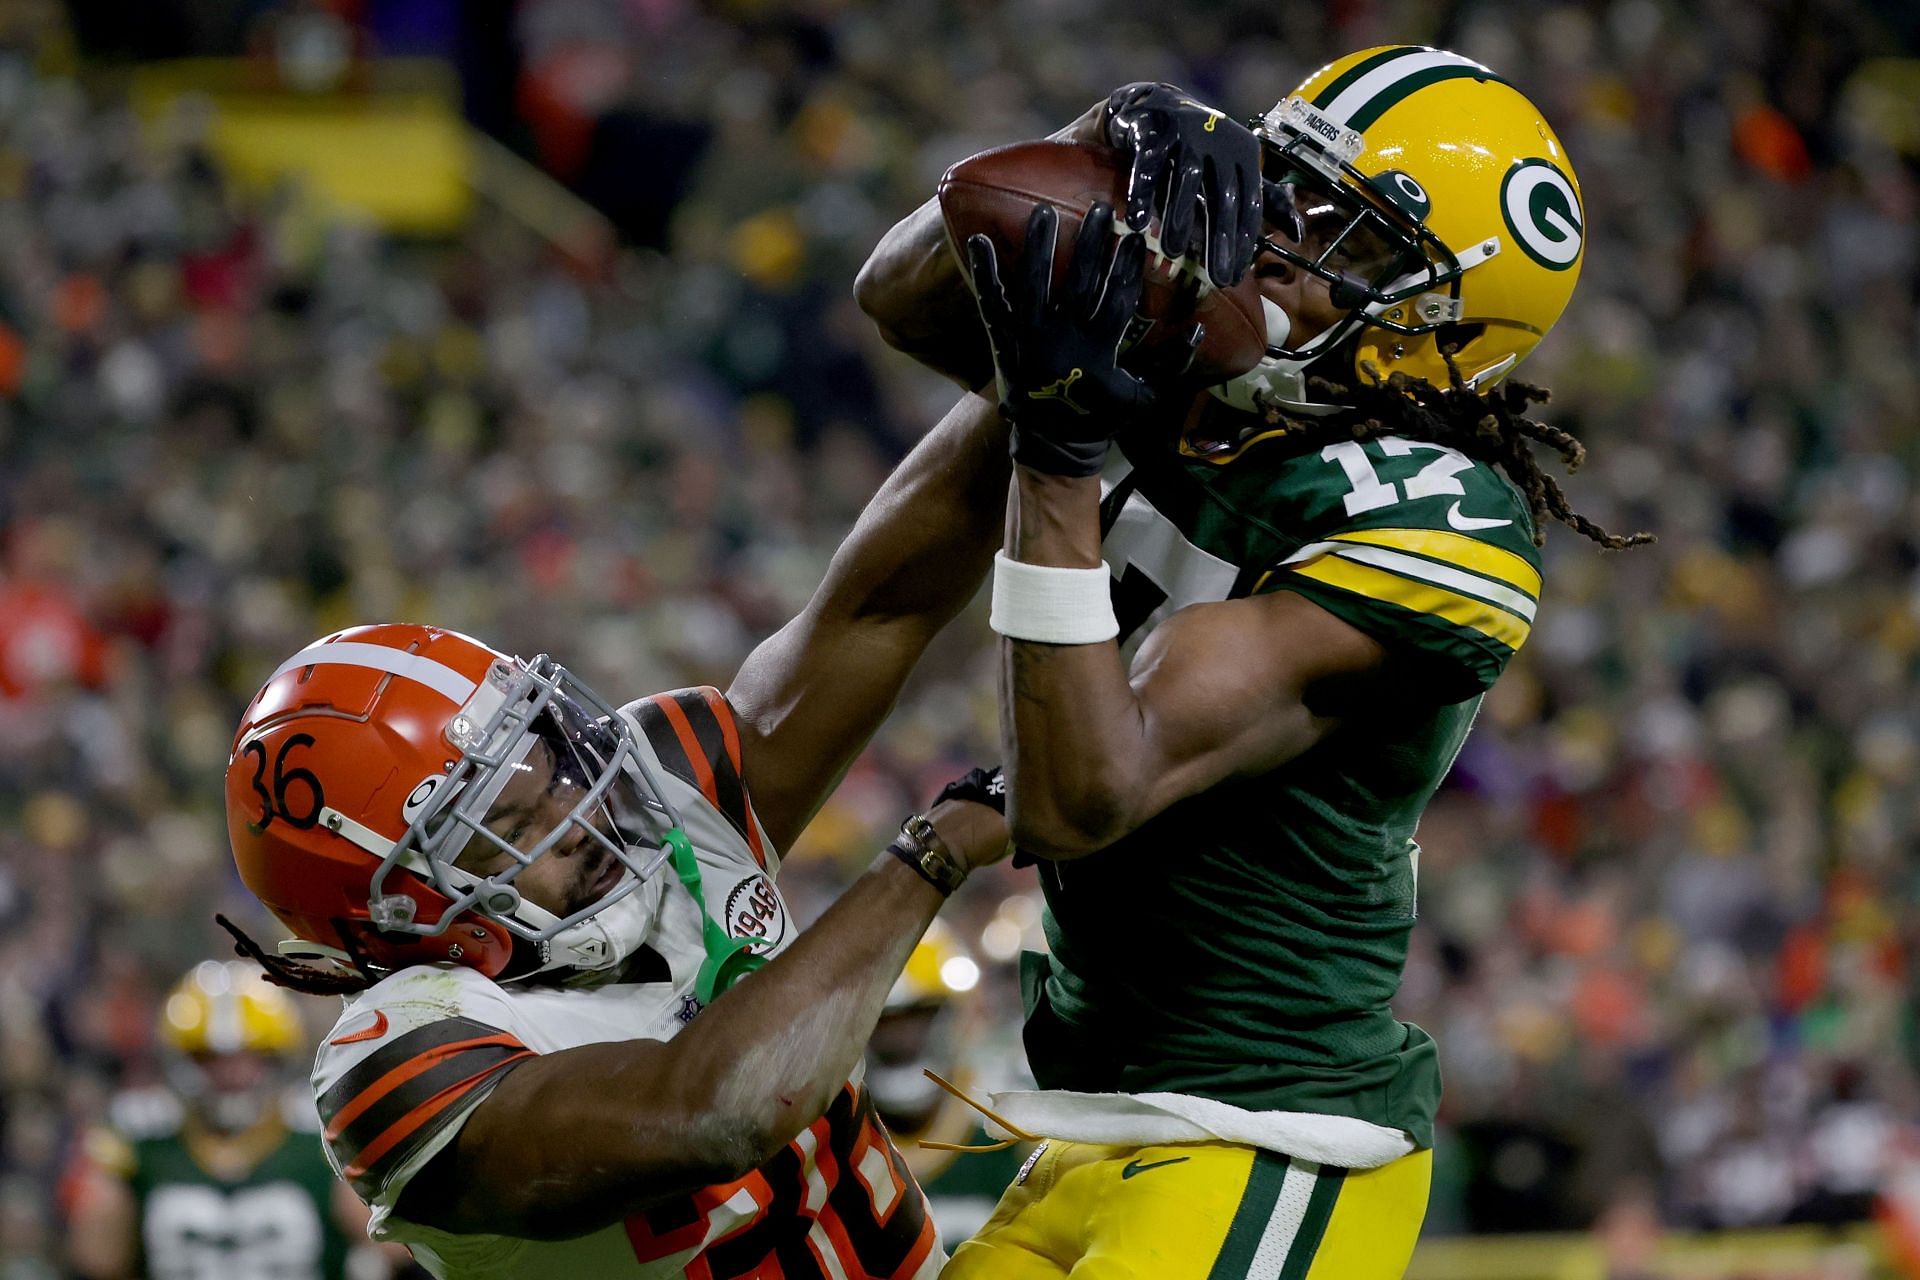 Former Green Bay Packers wide receiver Davante Adams wrestles a pass from a defender.